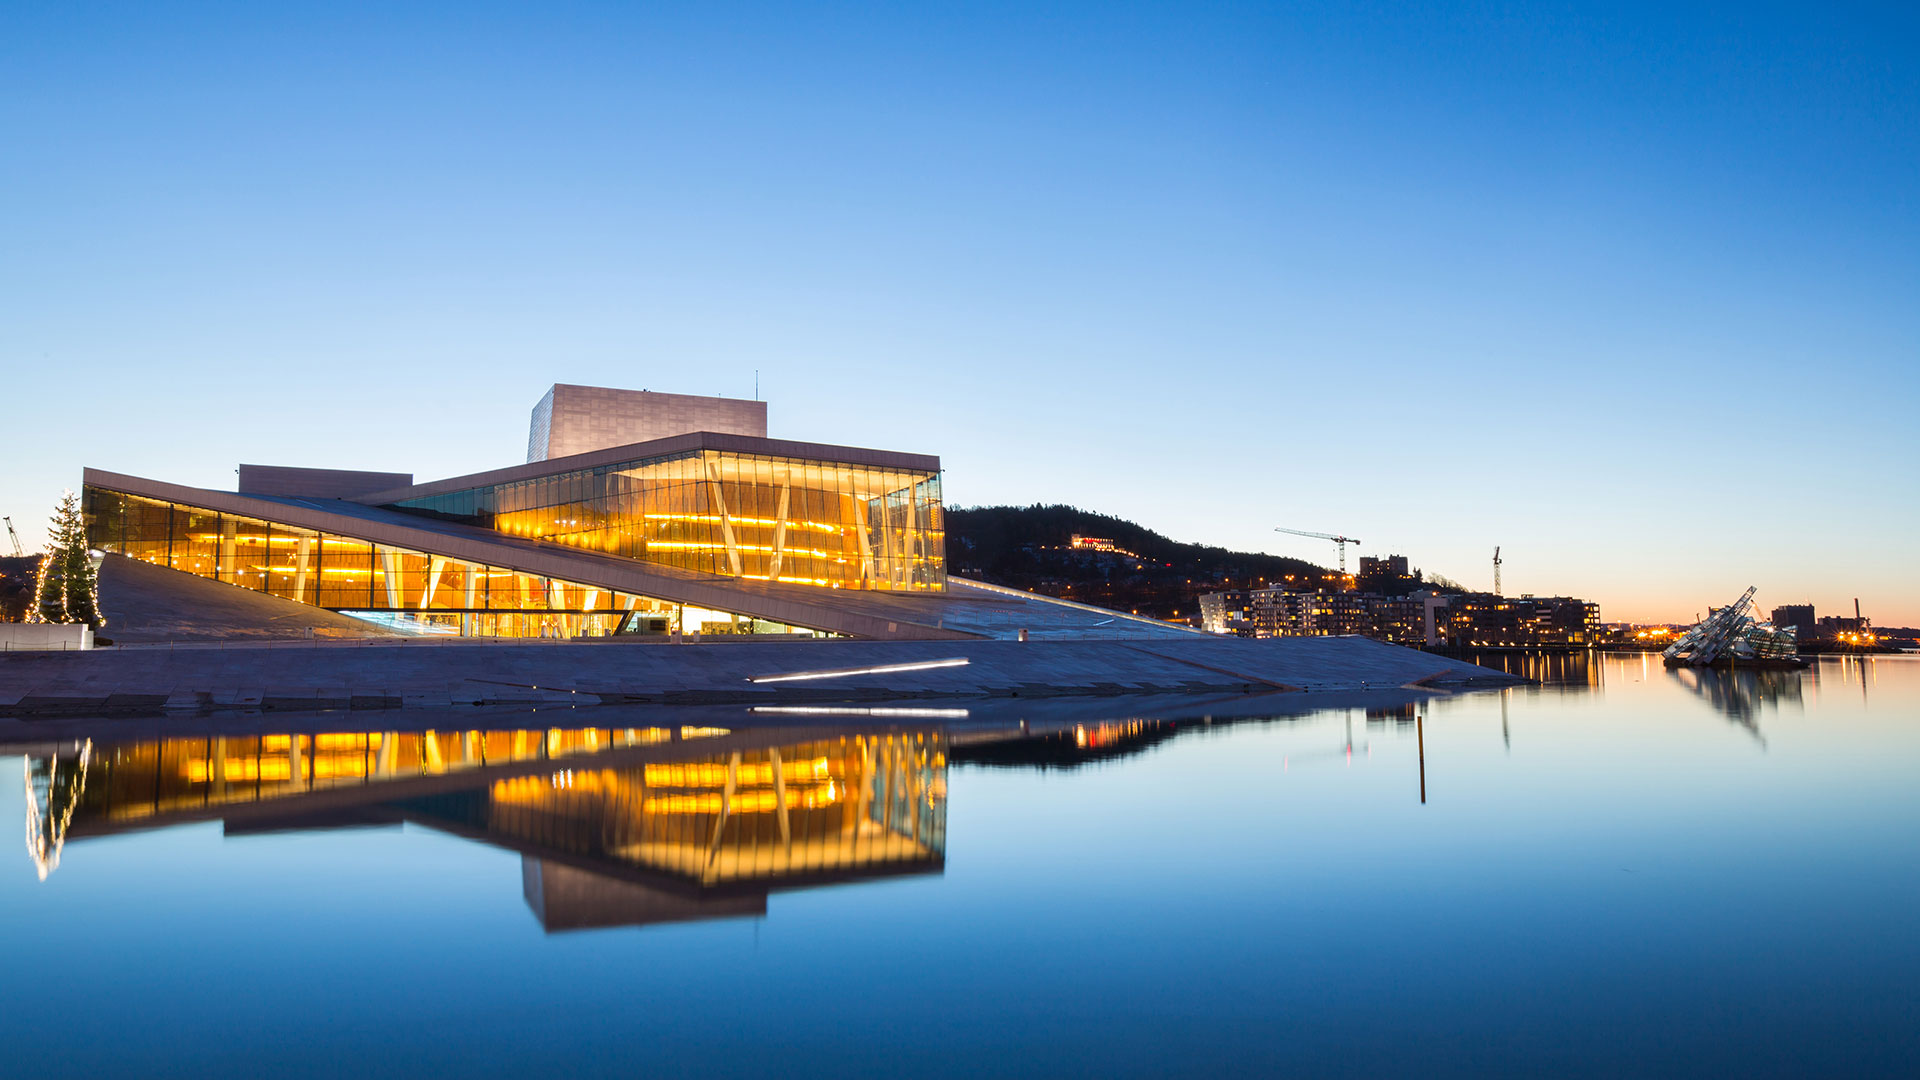 Free photo: Oslo Opera House - Architecture, Marble, Water - Free Download  - Jooinn